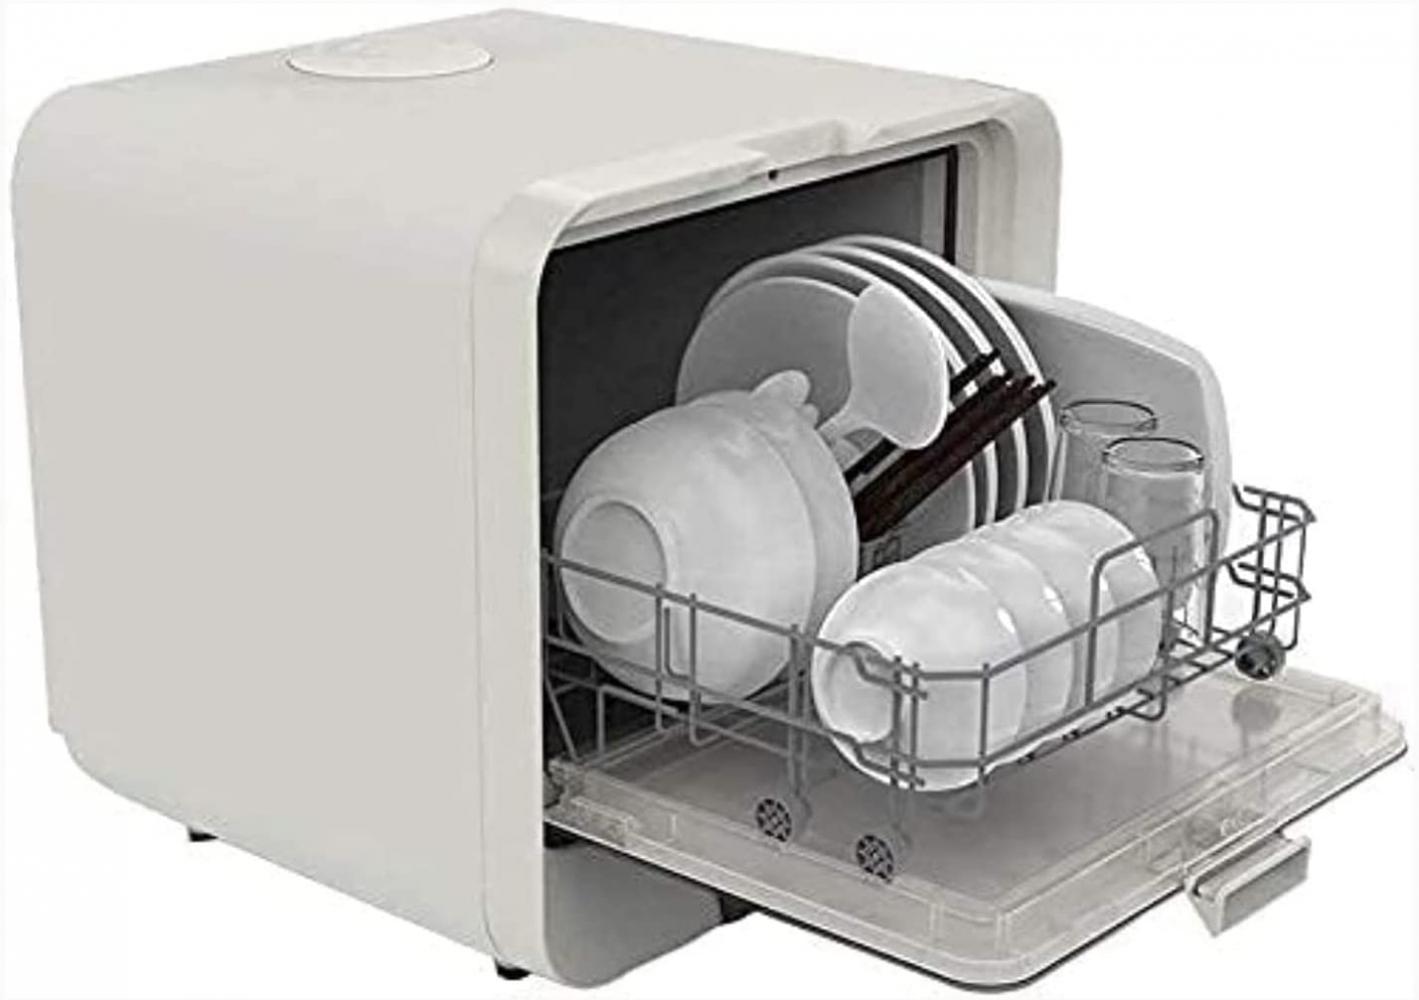 Complete Portable Countertop Dishwasher with 5-Liter Built-in Water Tank, 4 Programs, Baby Care, Glass & Fruit Wash